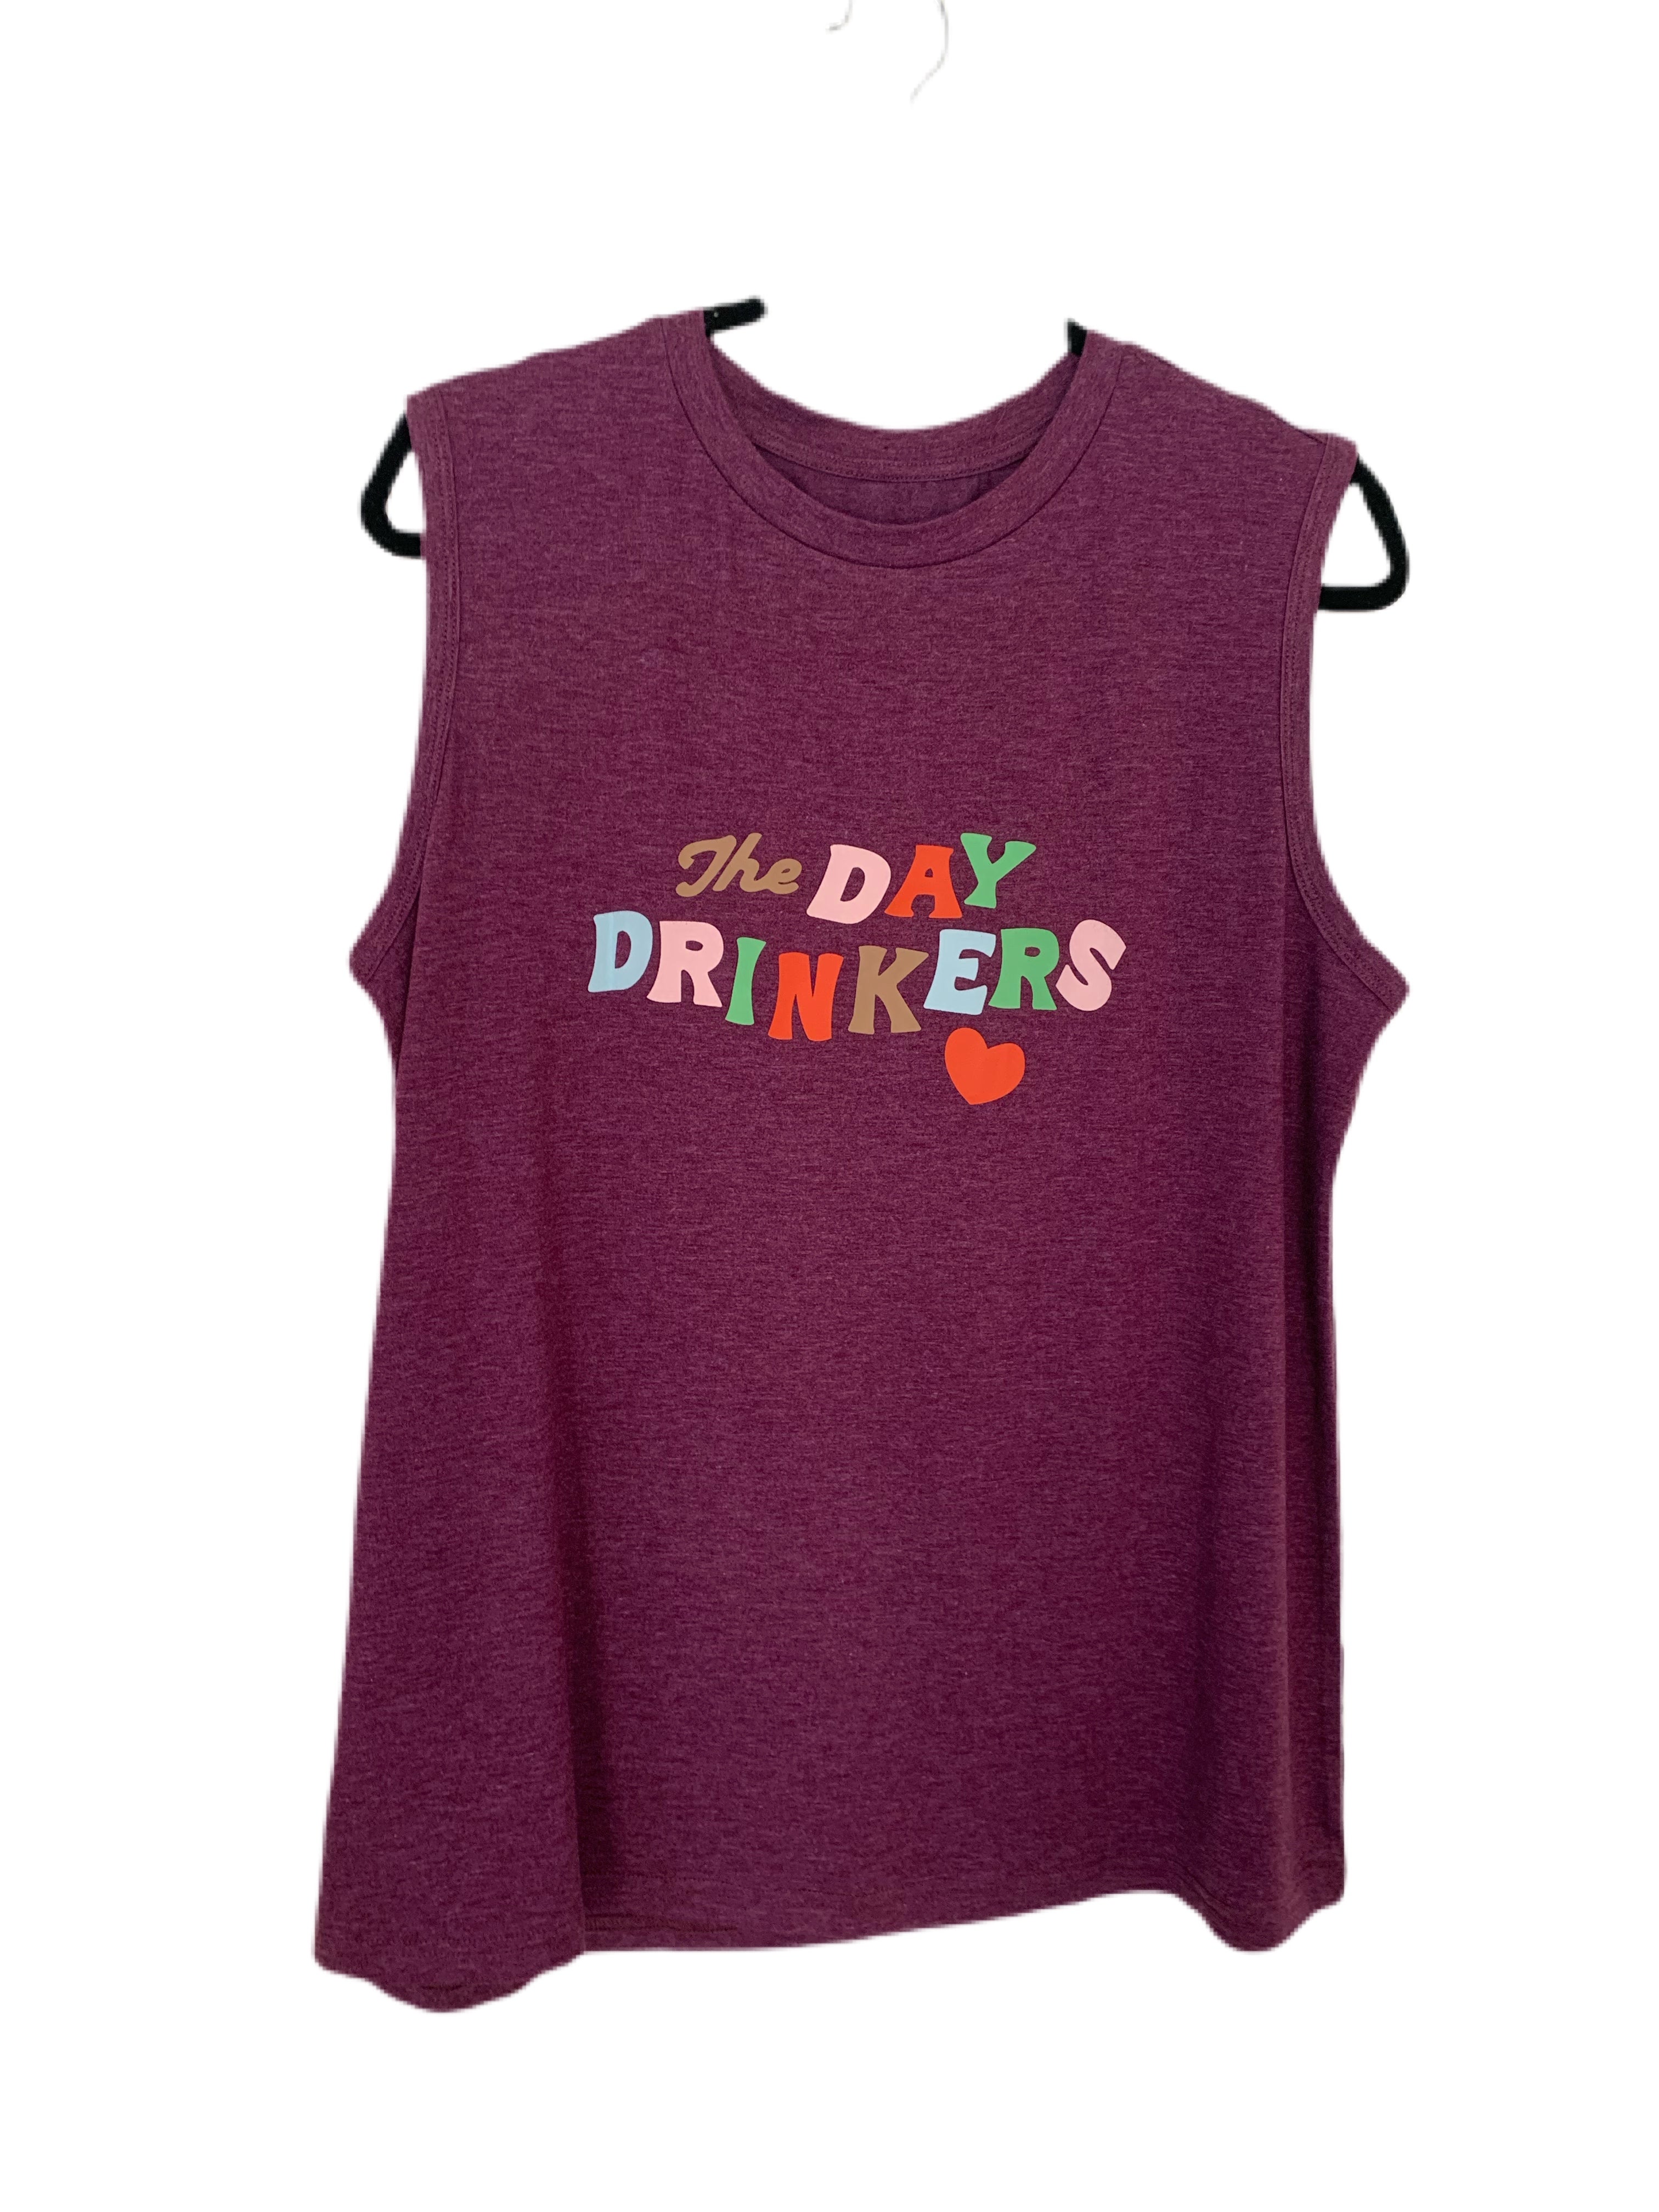 This classic purple sleeveless tee is soft and comfortable, light and breathable, perfect for hot summer days. Day Drinkers print is vinyl letters in multiple colors. Grab all your friends and have a good time with this trendy top.